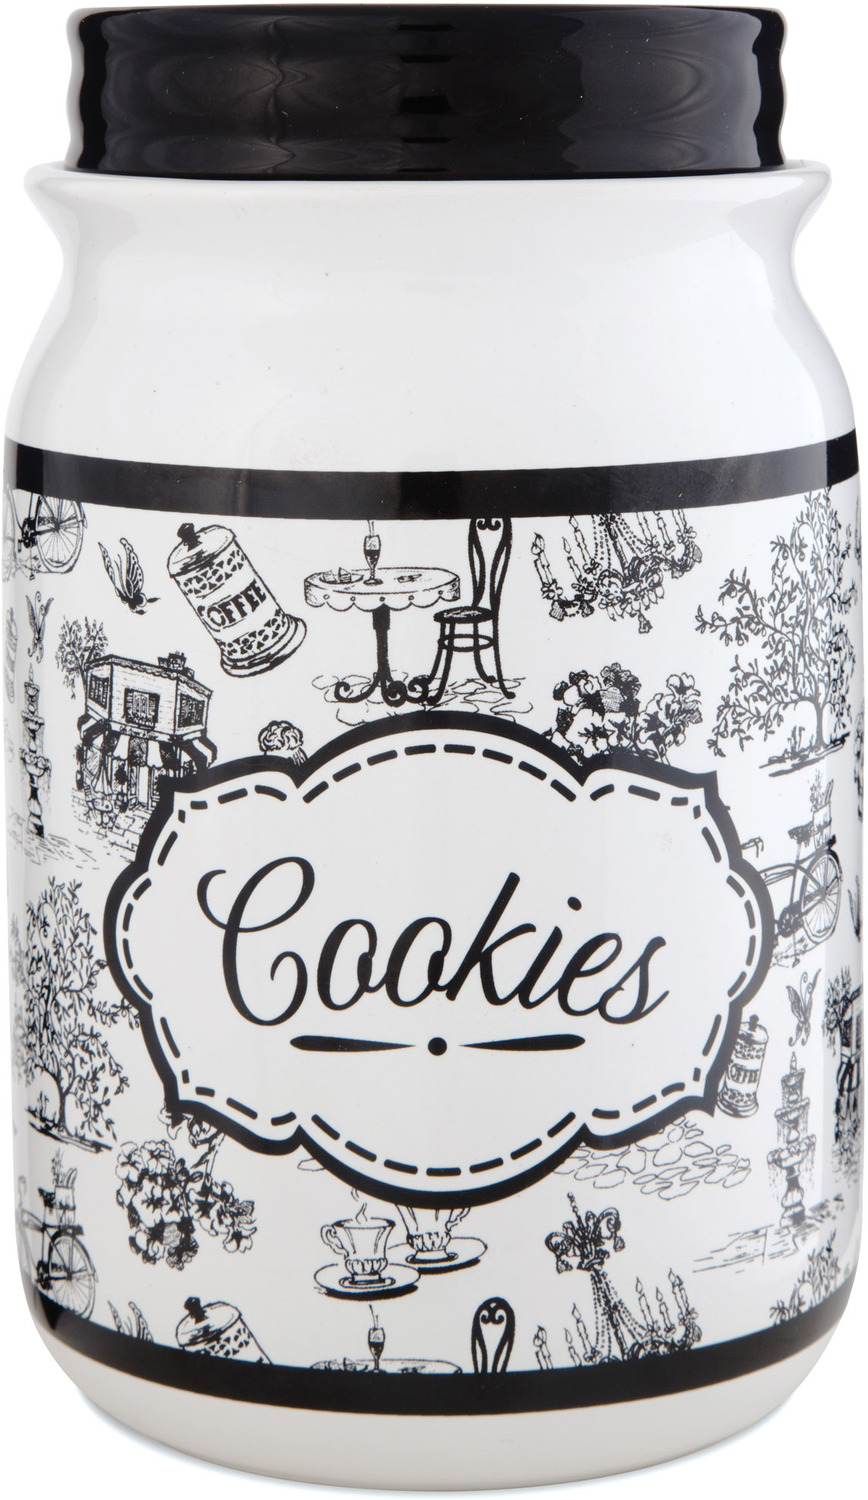 Cafe Toile by You & Me by Jessie Steele - Cafe Toile - 9" Cookie Jar